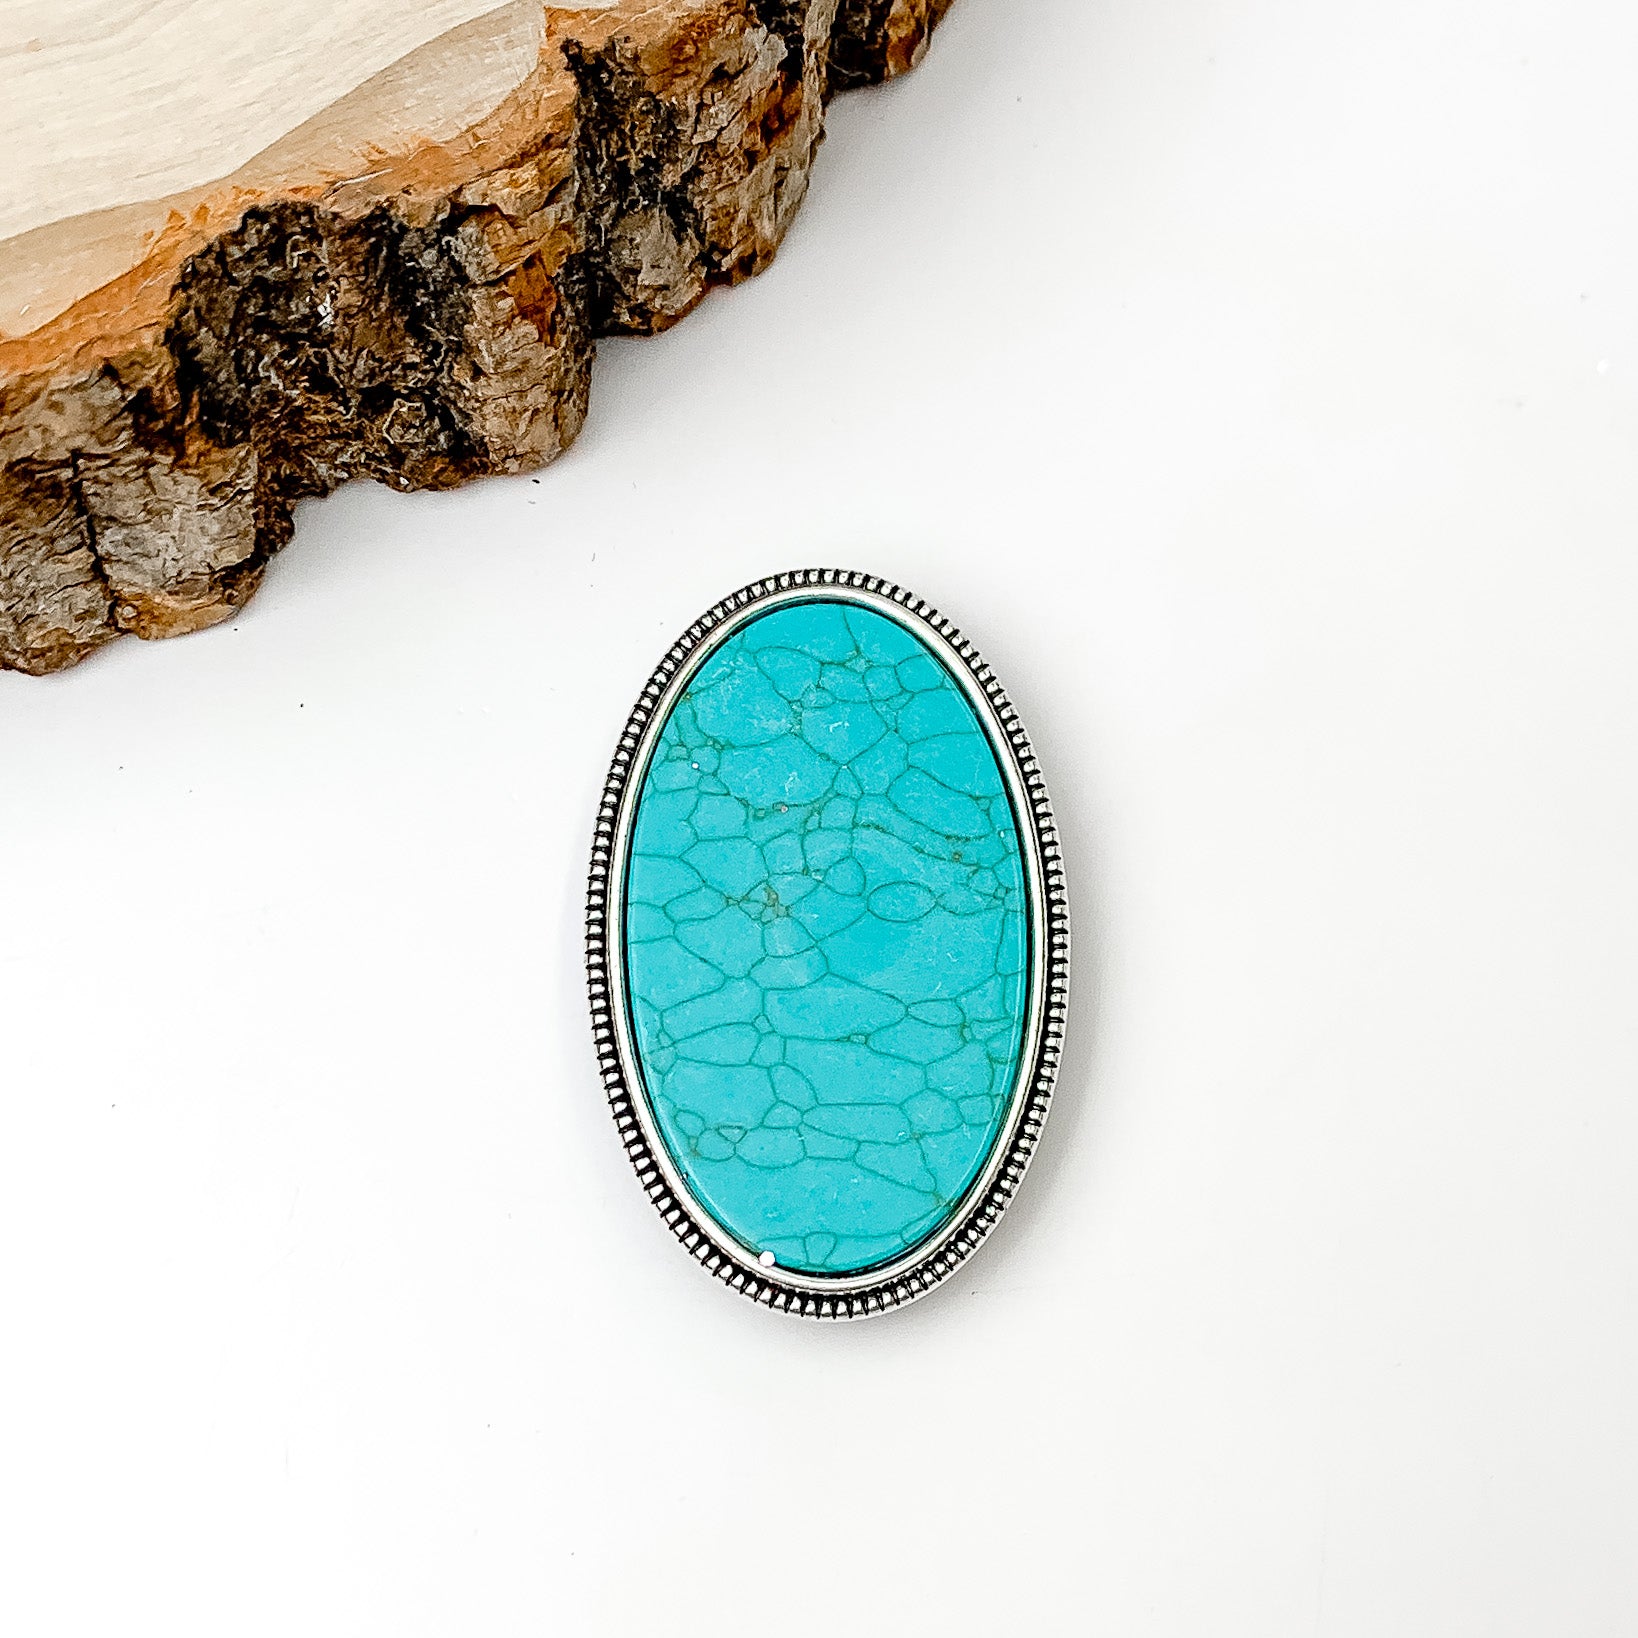 Turquoise Stone With Silver Tone Trim Oval Phone Grip. Pictured on a white background with a wood piece in the top left corner.